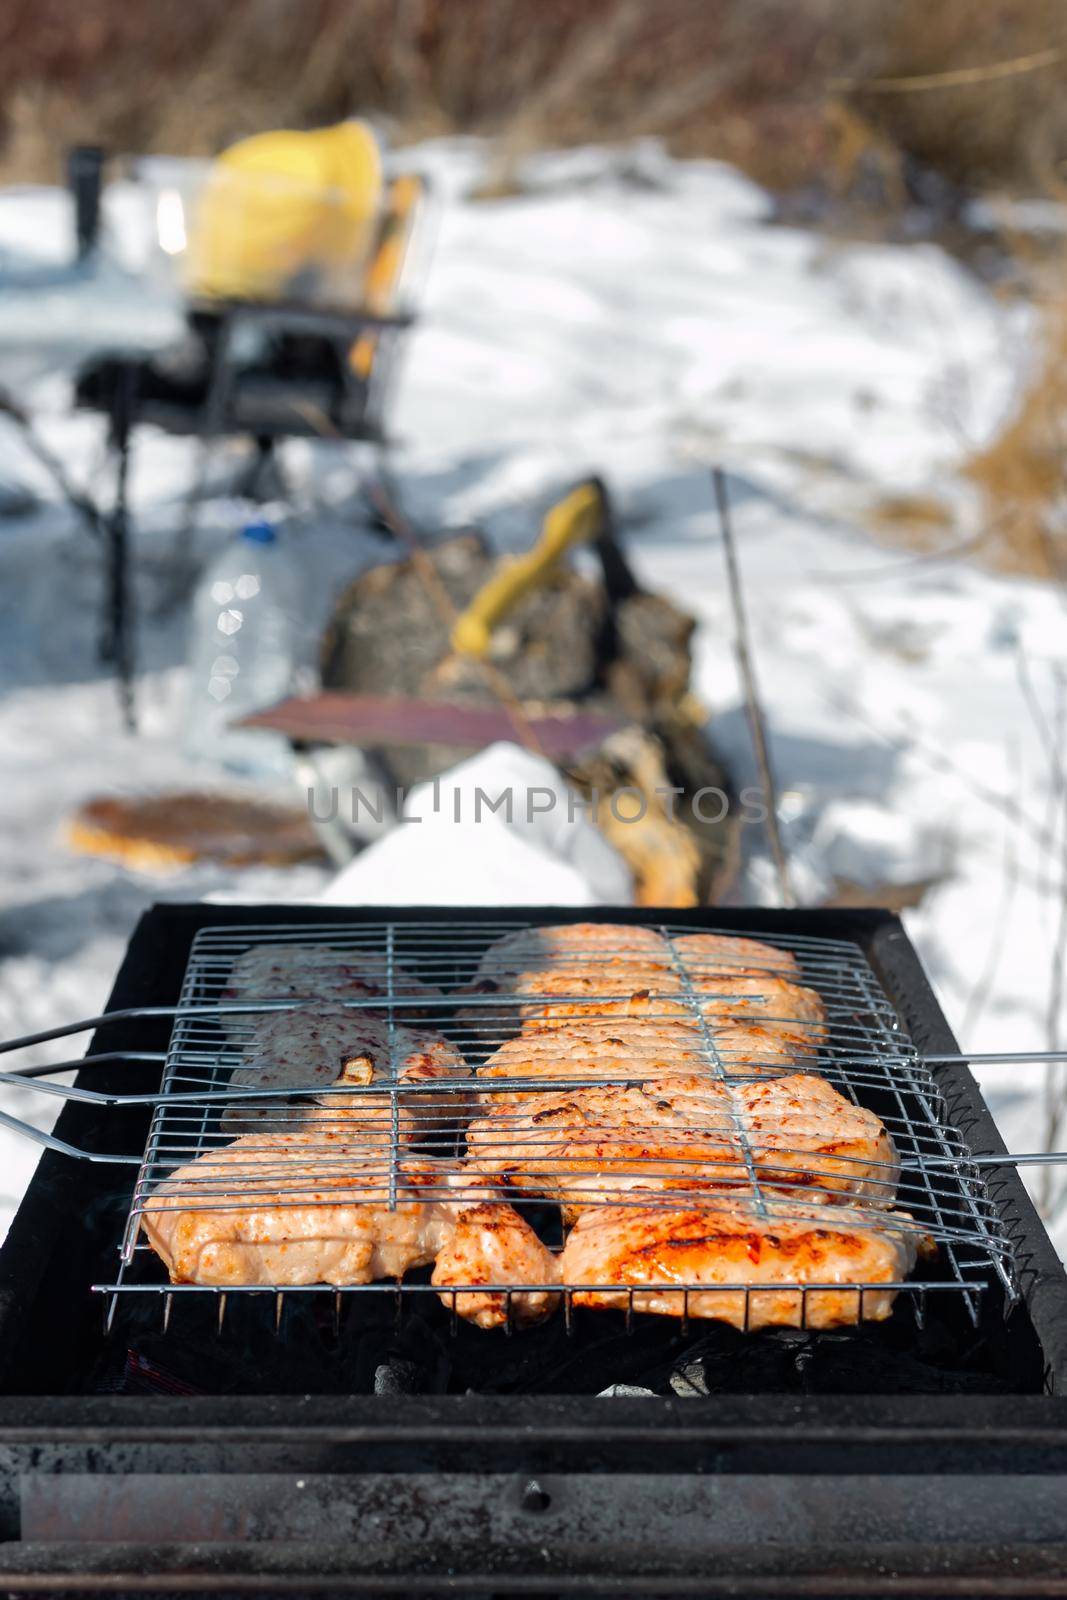 Winter barbecue party outdoors, grill steak meat over hot coals in BBQ at campsite cookout, close up view, camping lifestyle, vertical image